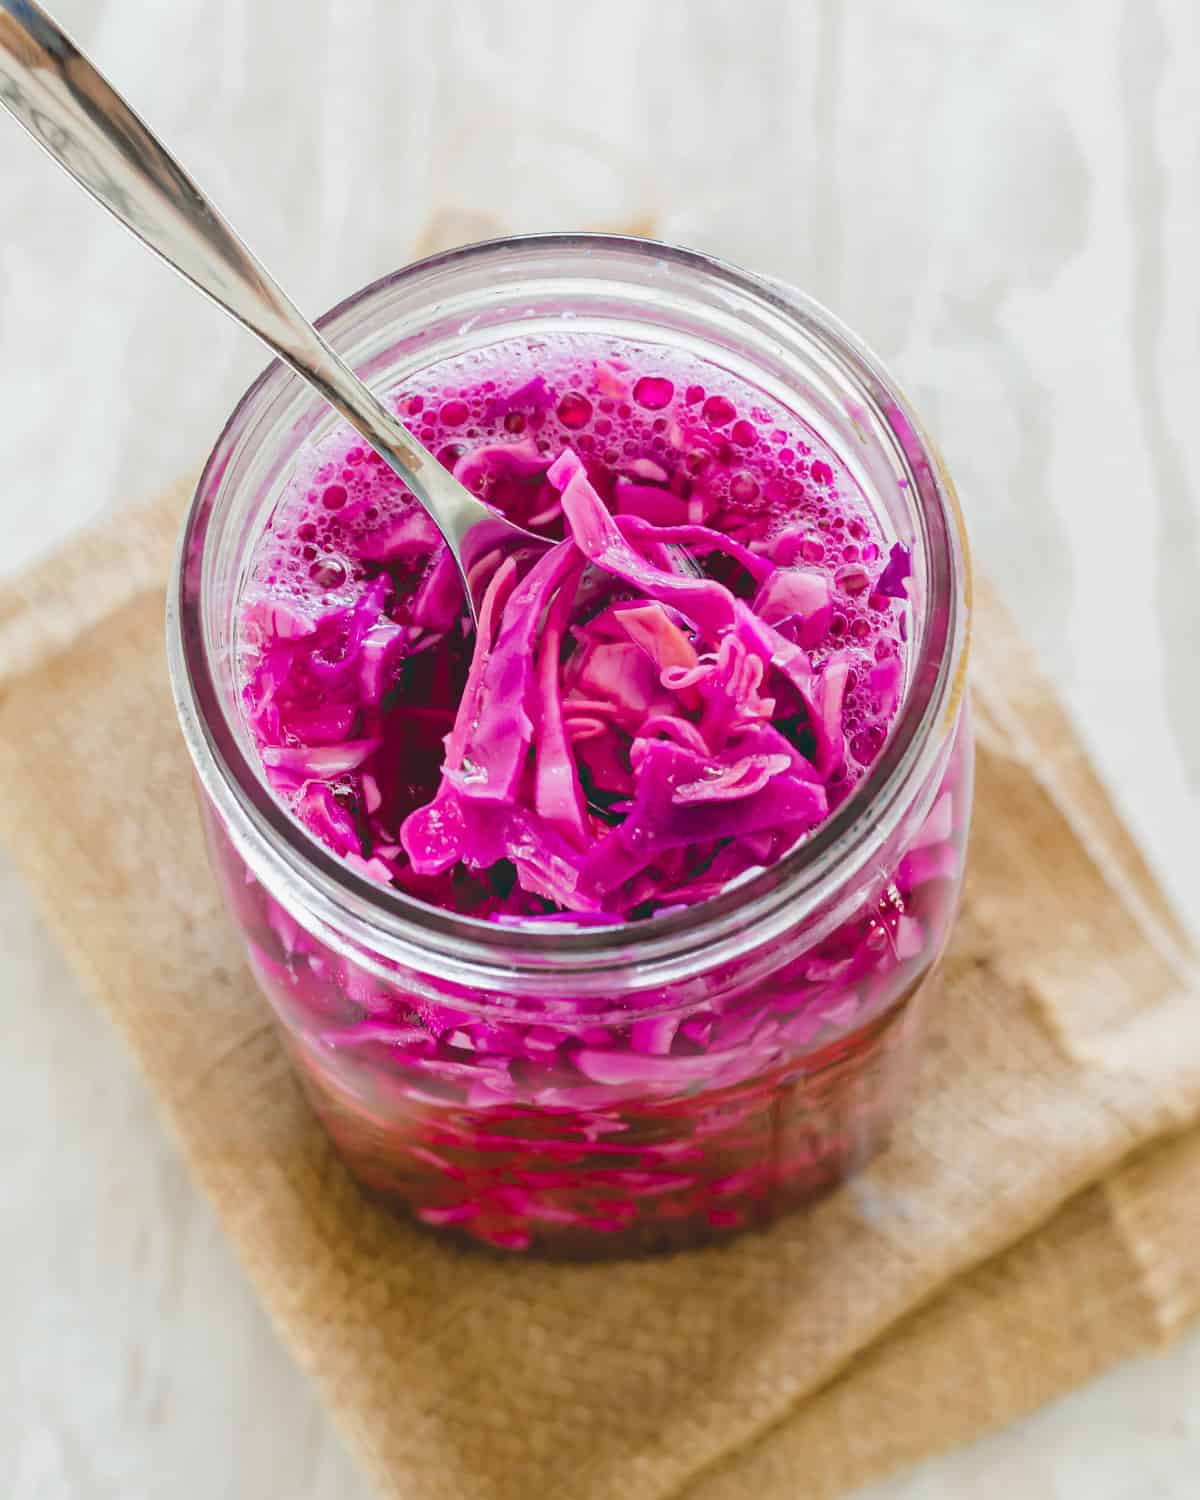 Red cabbage sauerkraut in a jar with a spoon.